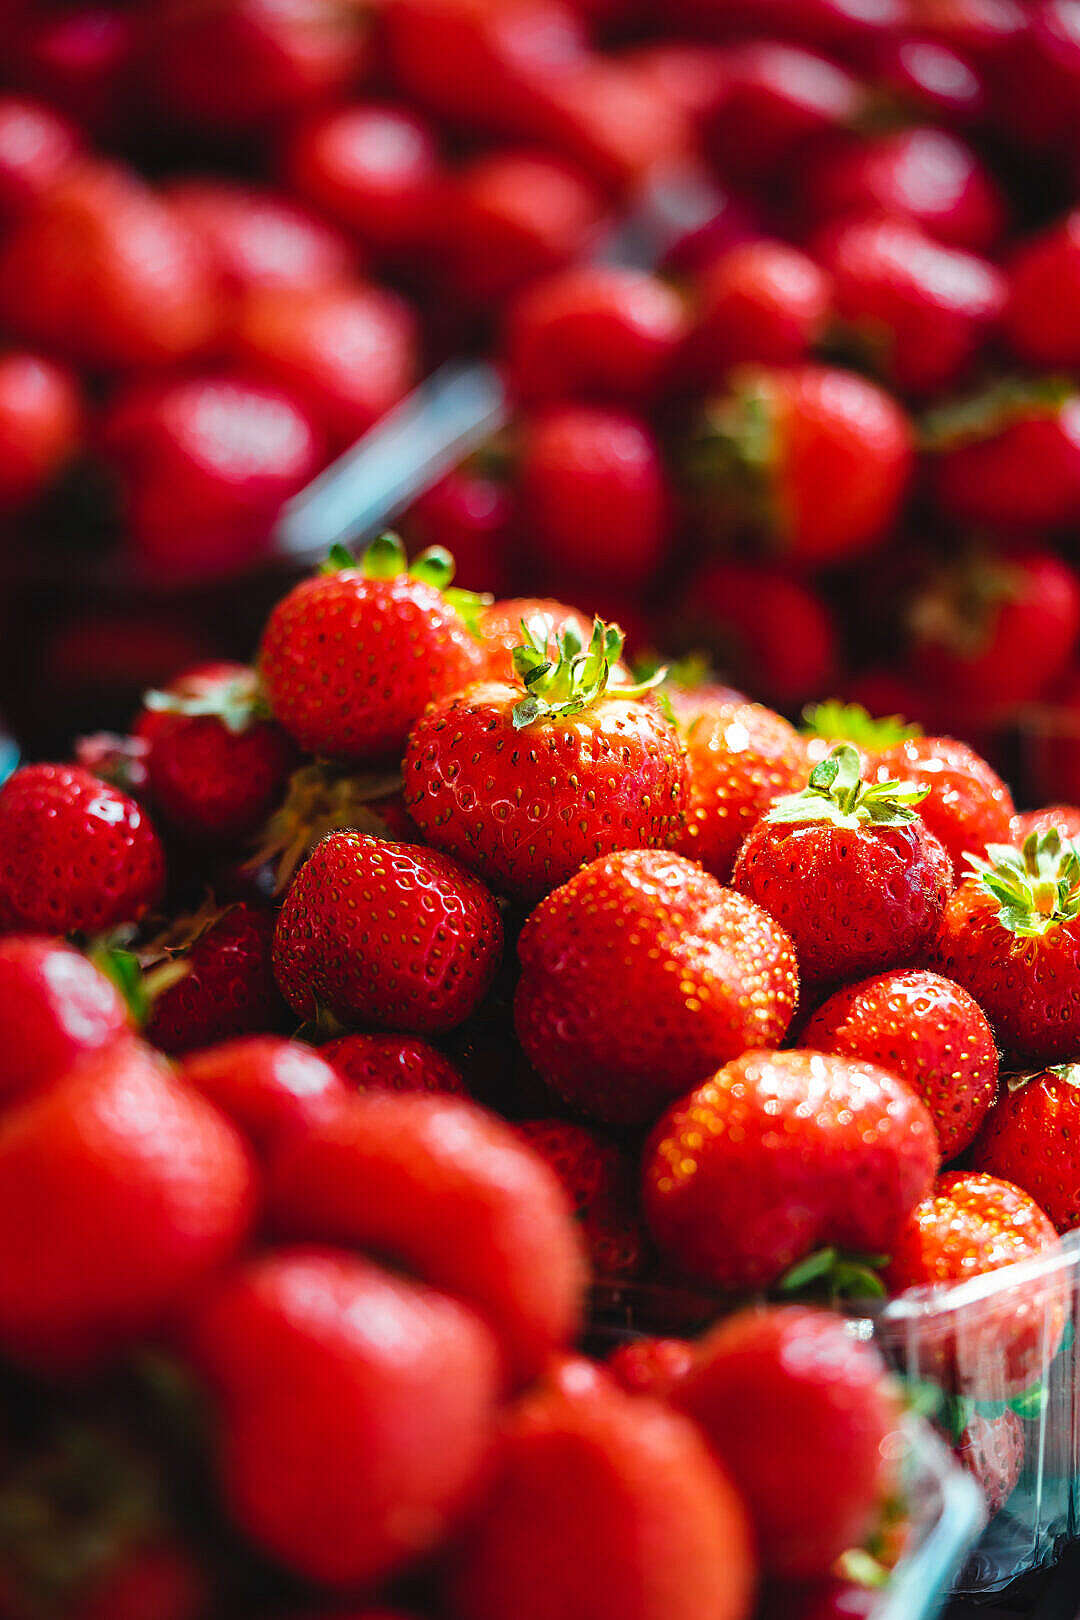 Download Pile of Fresh Strawberries at Farmers’ Markets FREE Stock Photo